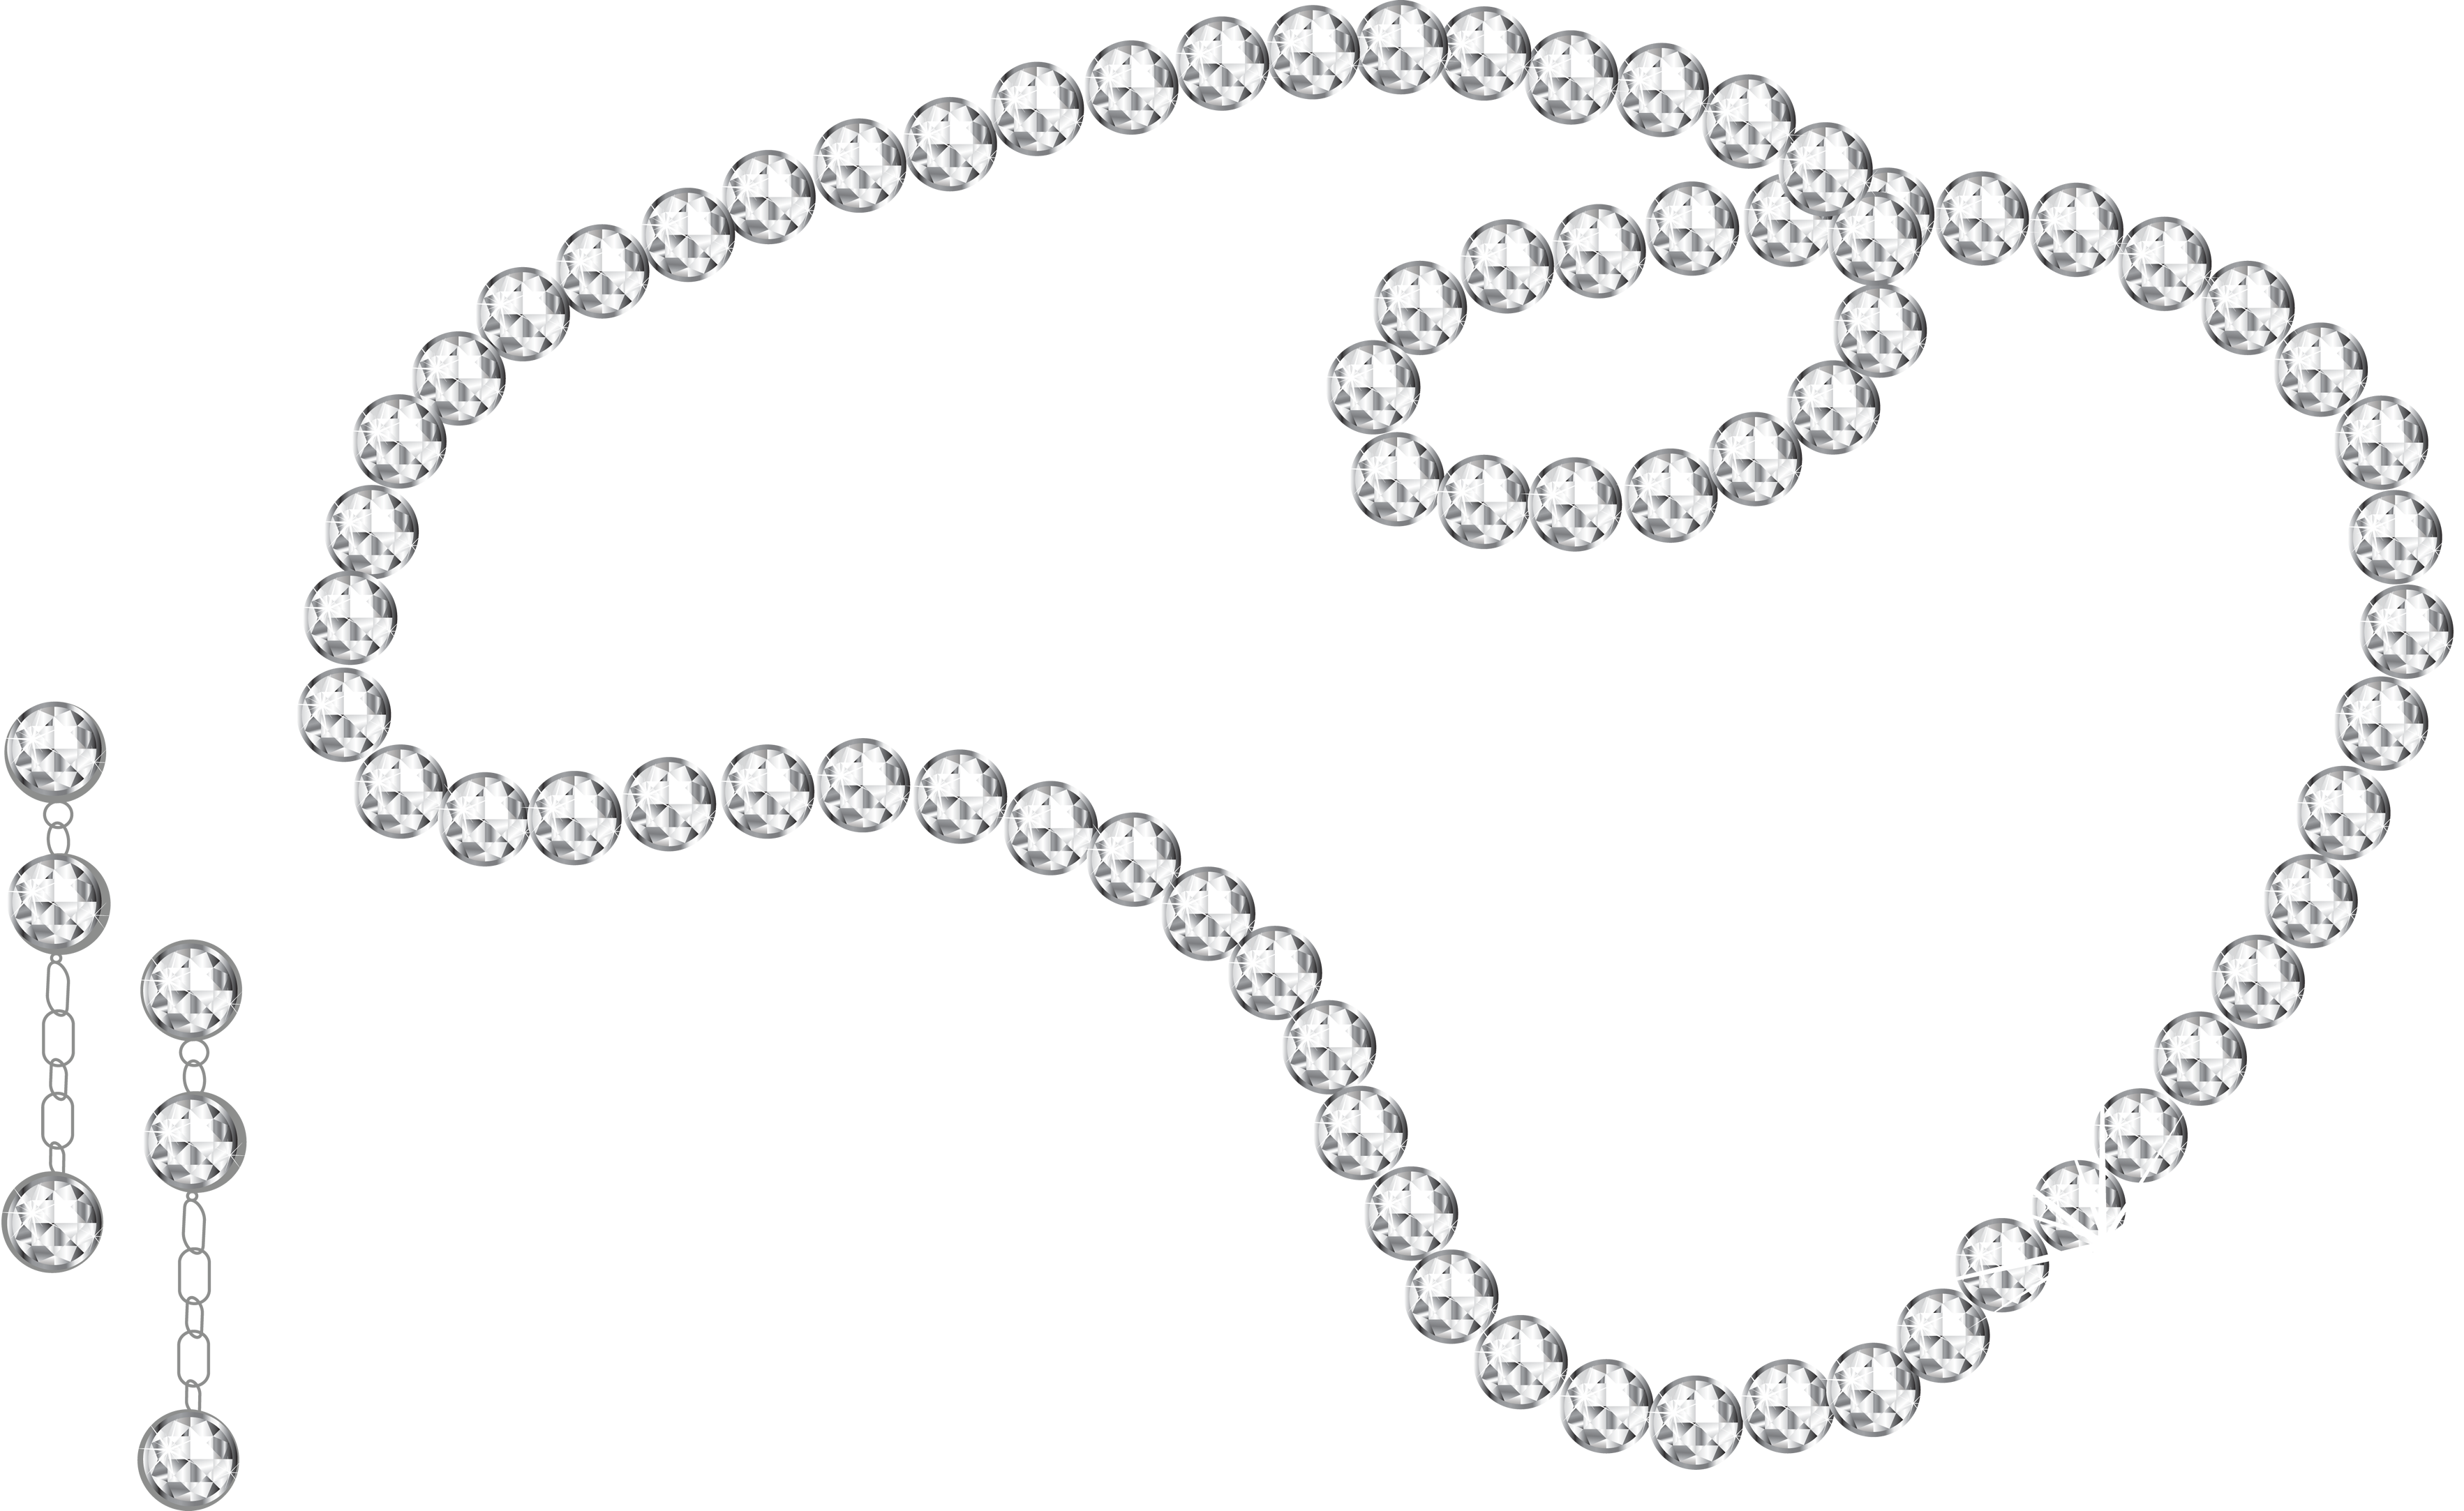 Diamond Necklace And Earrings